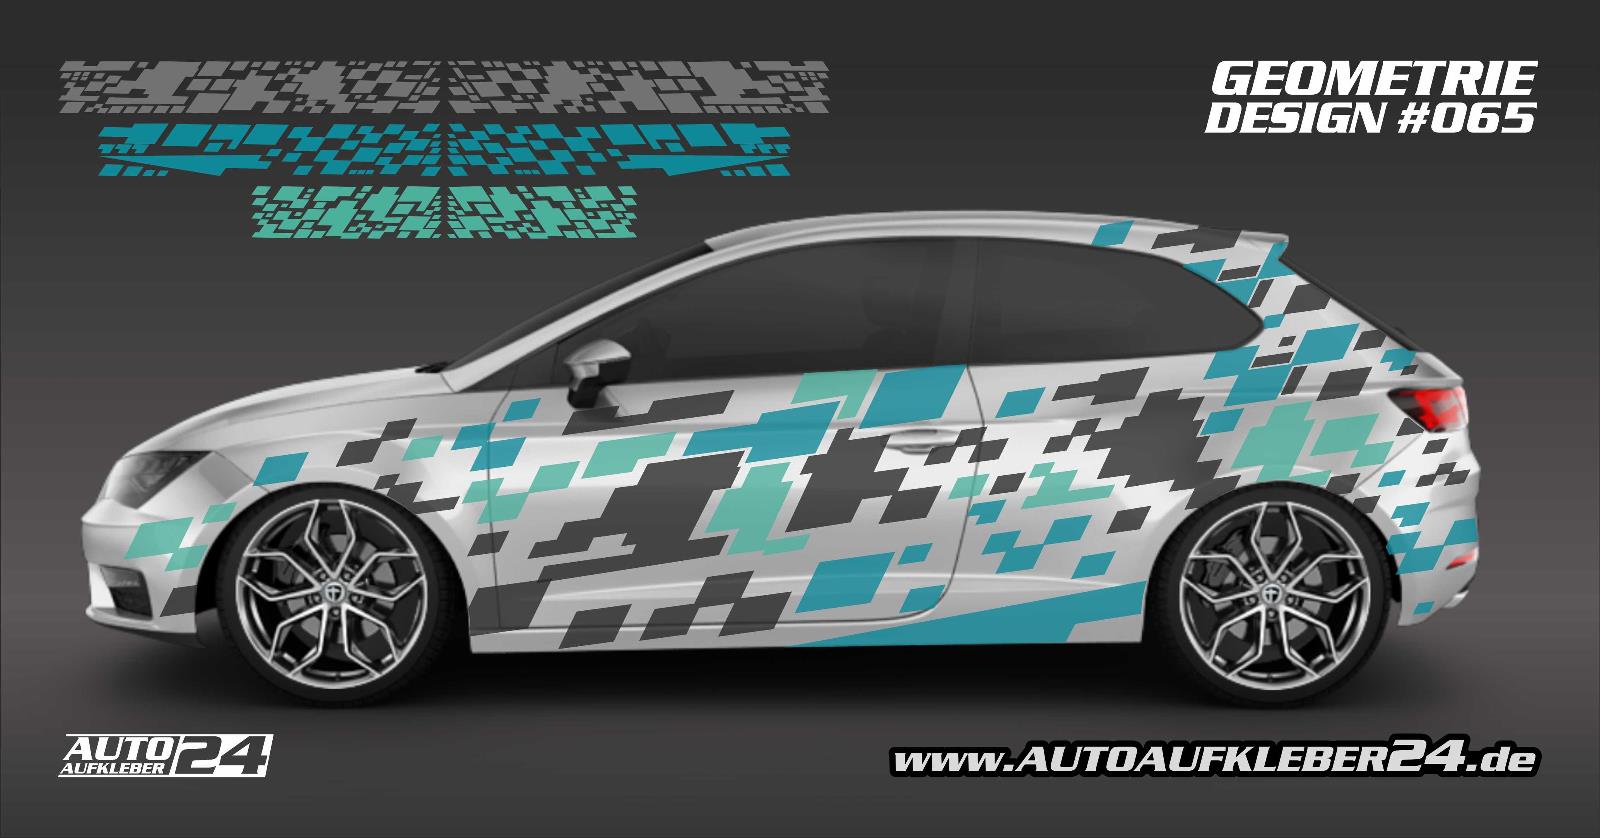 Geometrie Design 065 - carstyling and more - Autoaufkleber 24